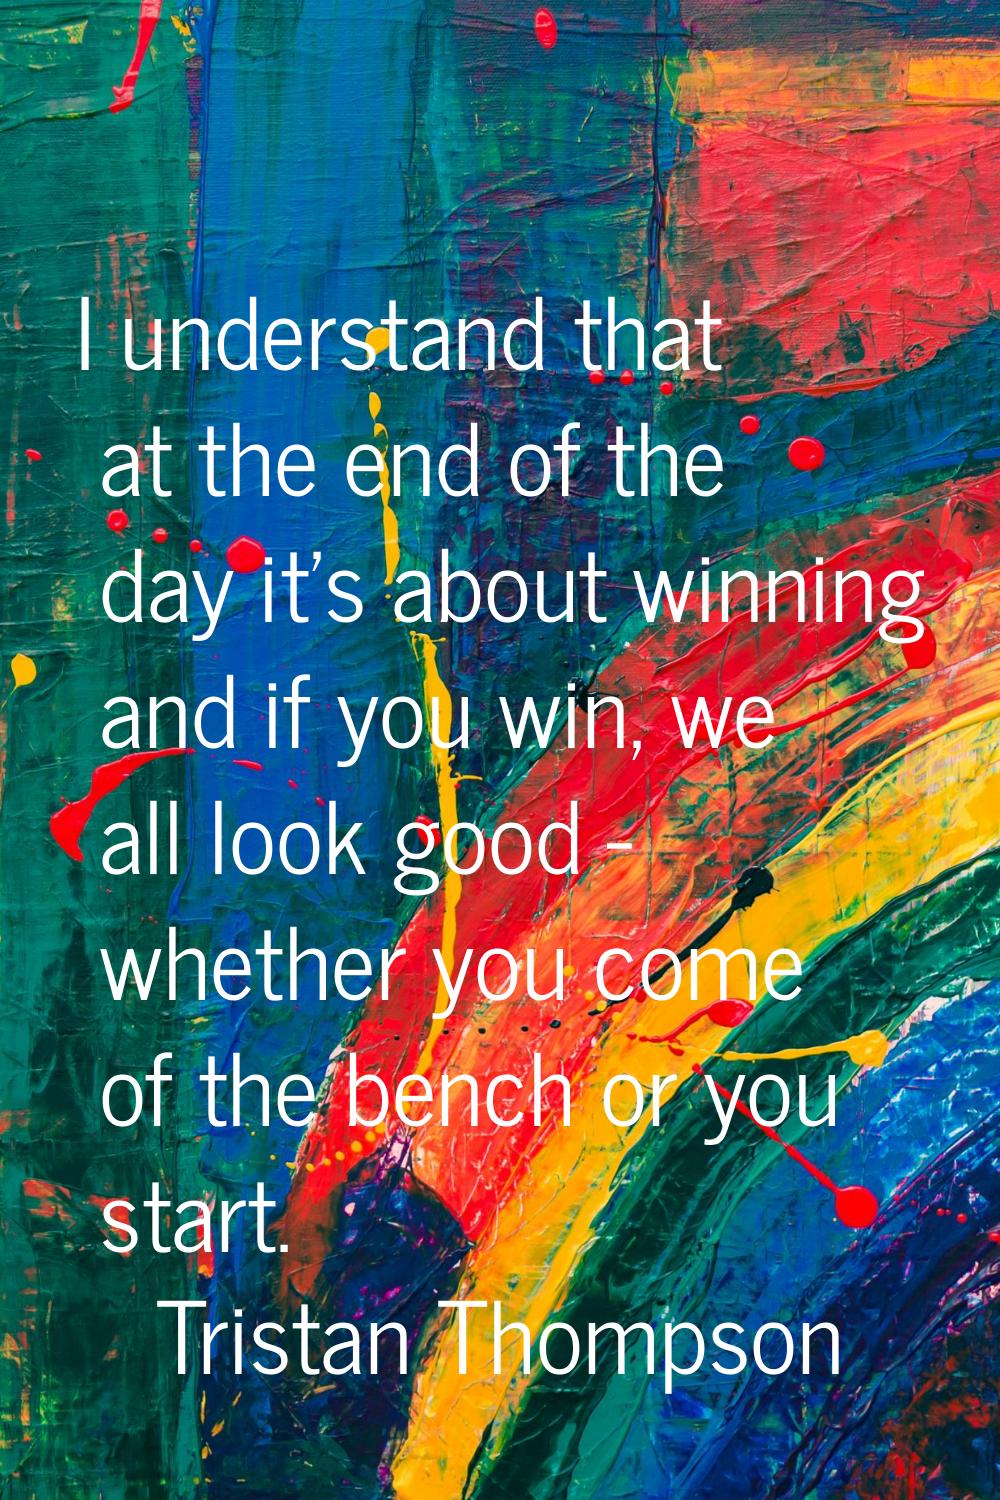 I understand that at the end of the day it's about winning and if you win, we all look good - wheth